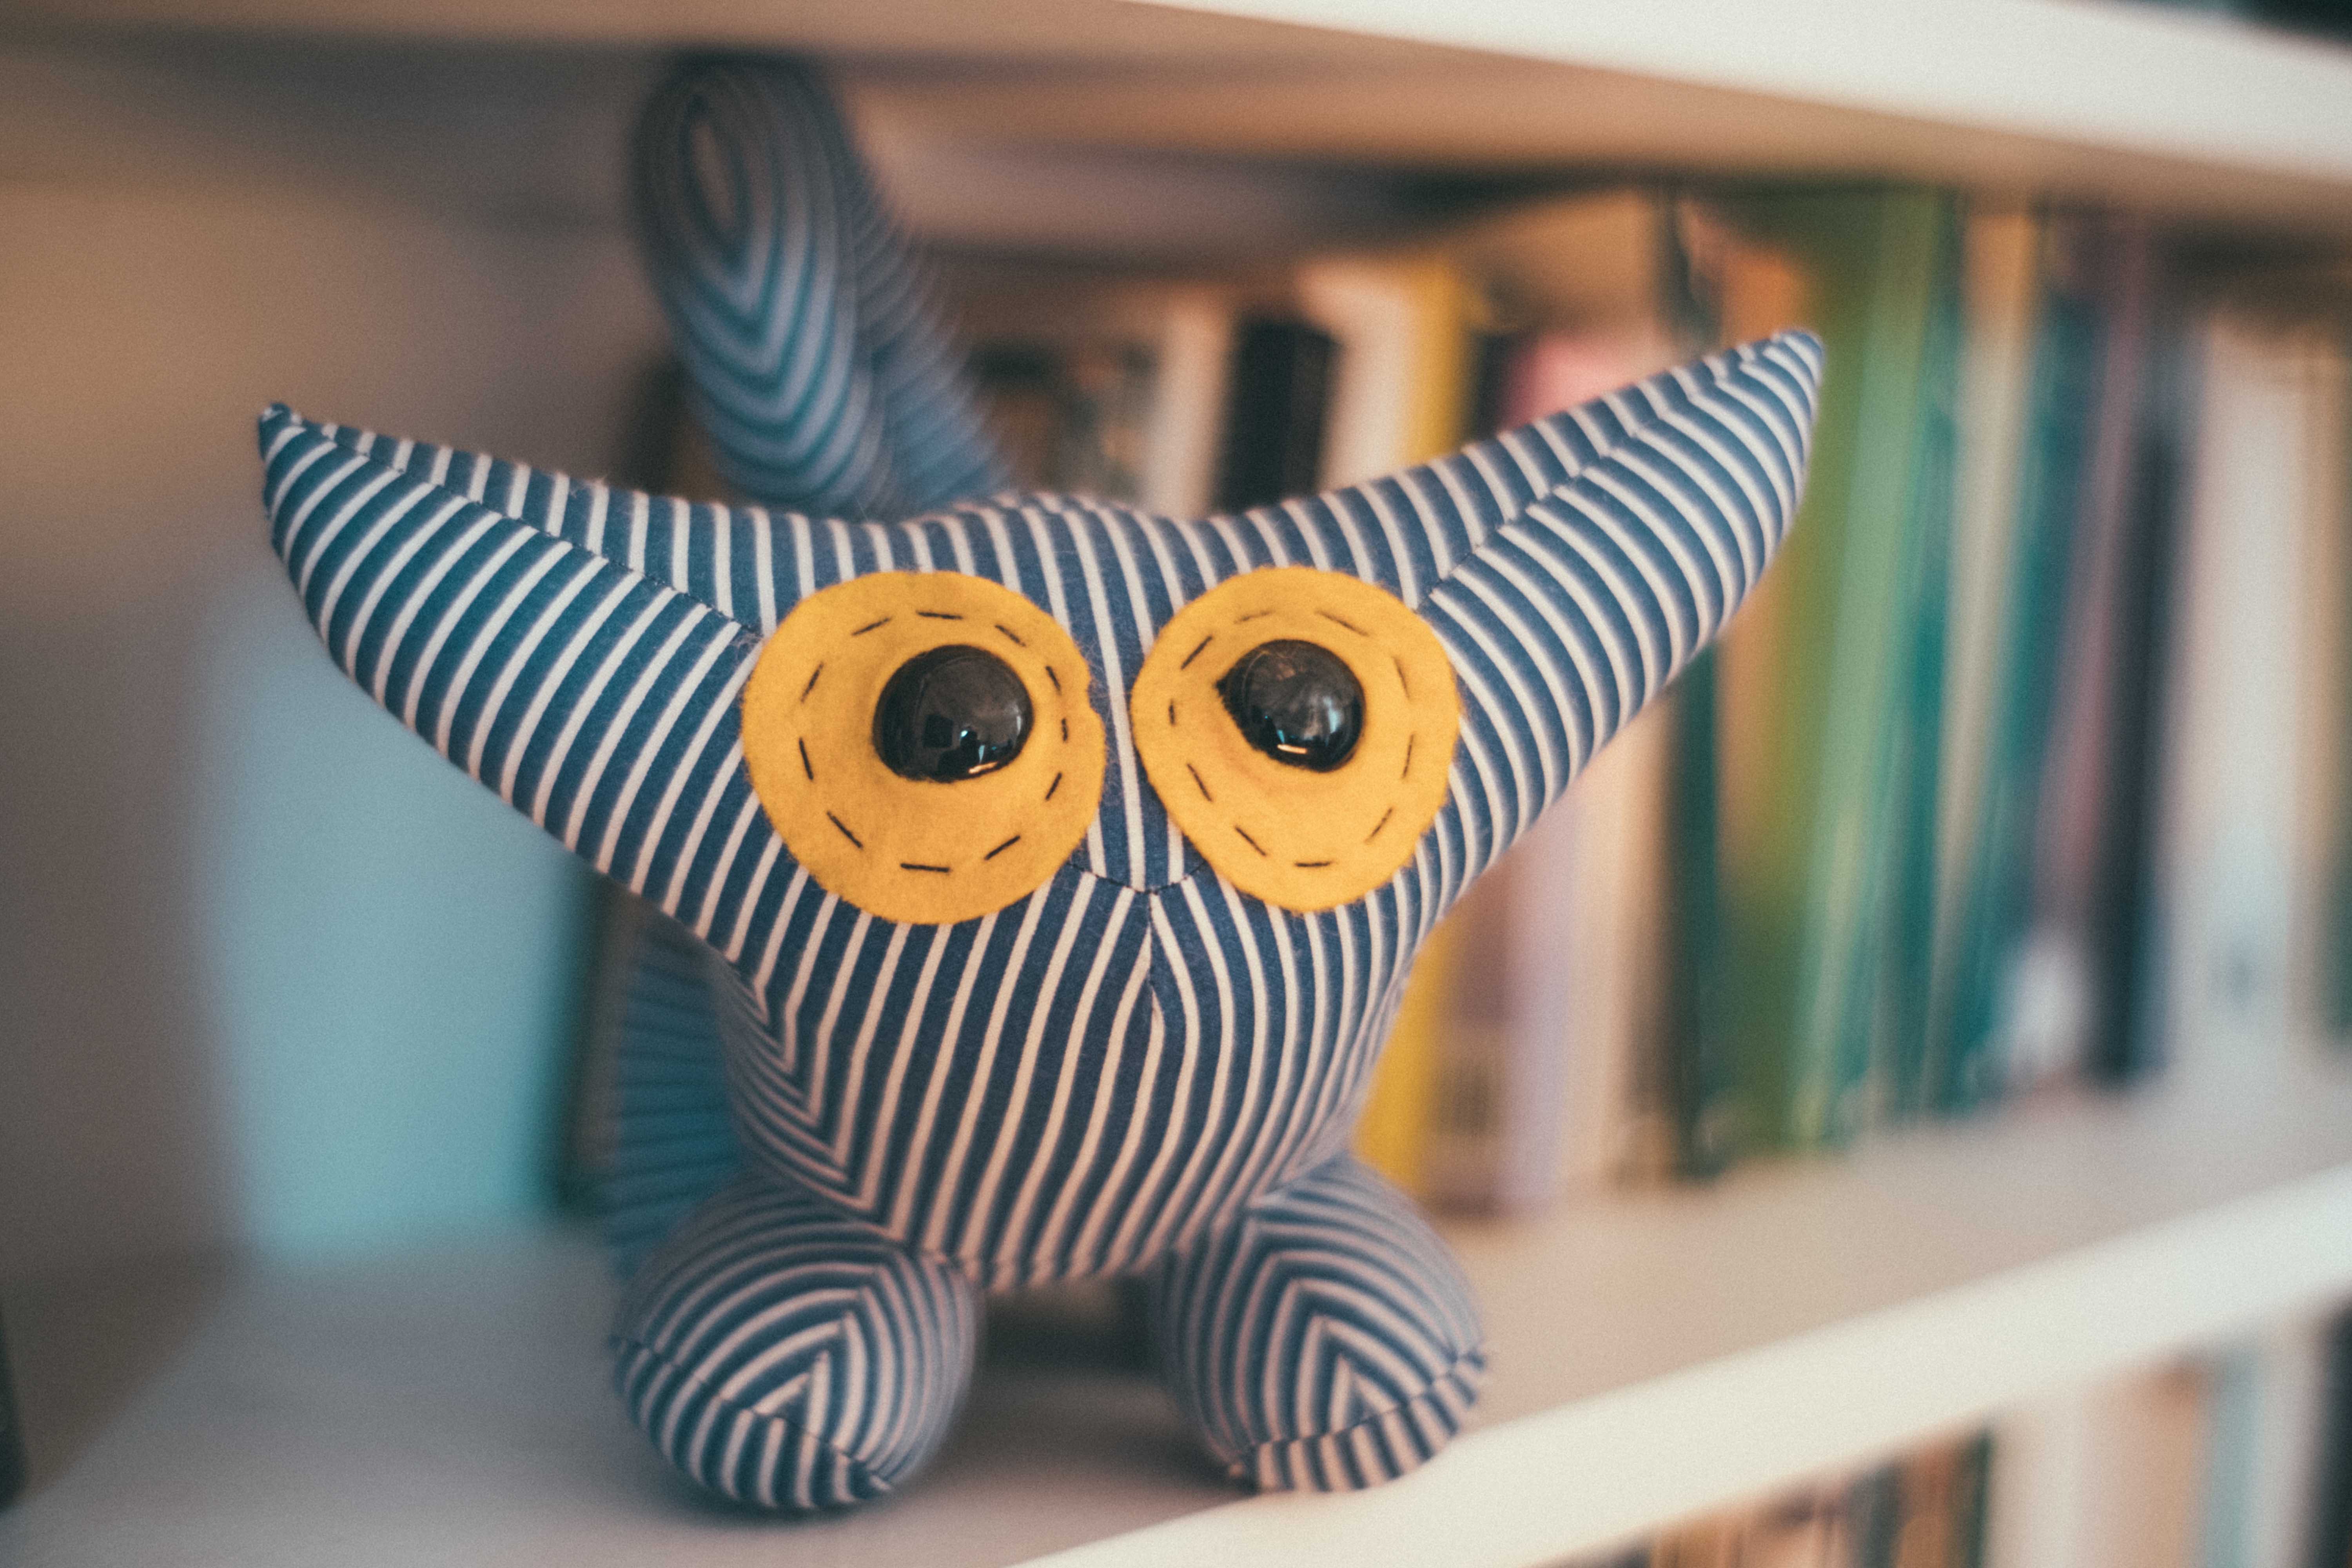 A stuffed animal with stripes, big ears, and big yellow eyes sits on a bookshelf. It's not clear what kind of animal the toy is meant to look like.